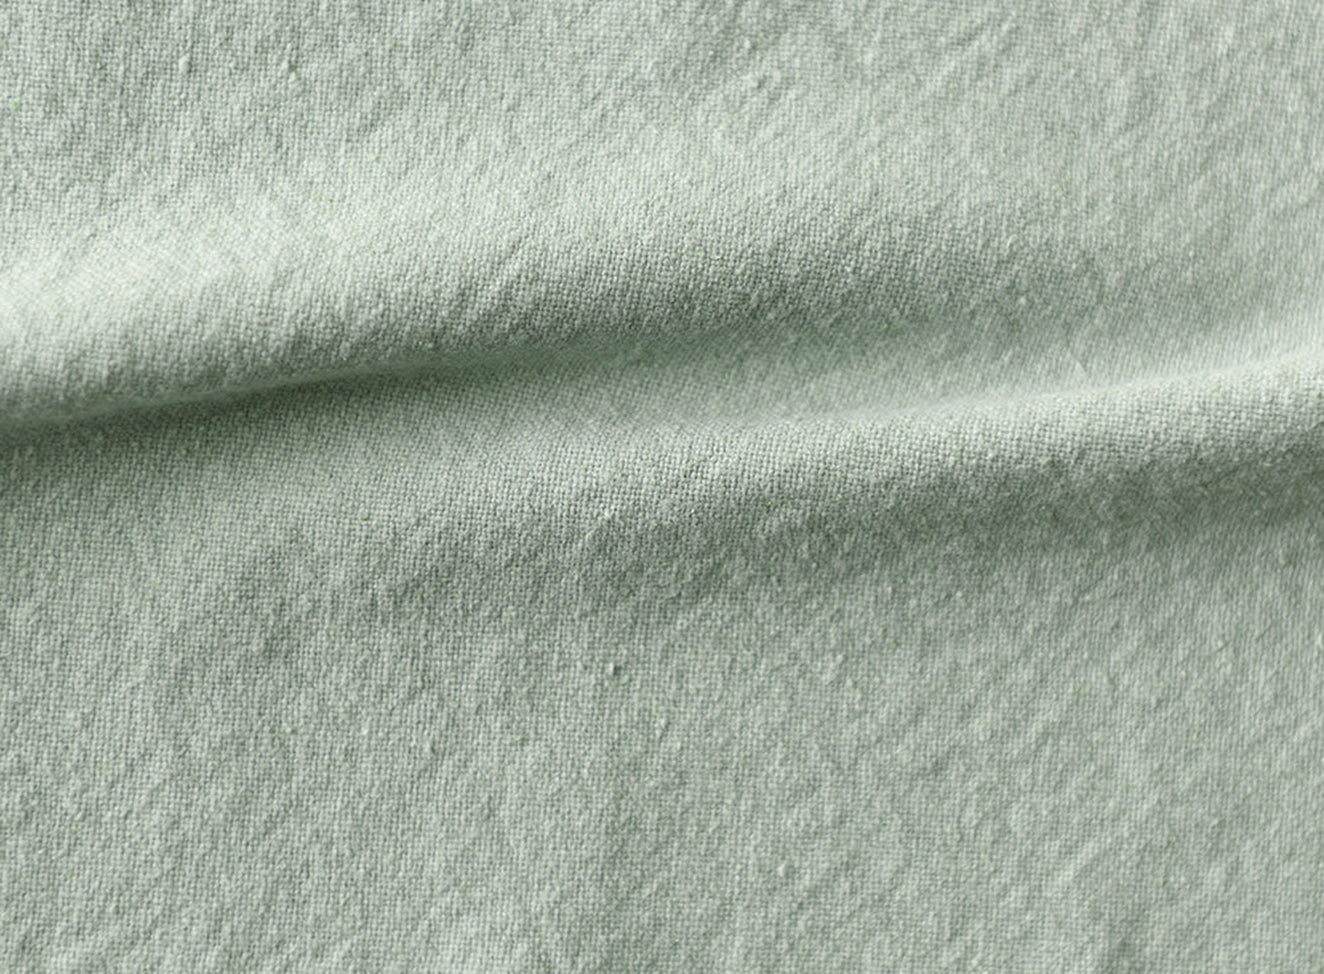 Swatch in Hello Aloe, a pale green Thread-Dyed Cotton Linen